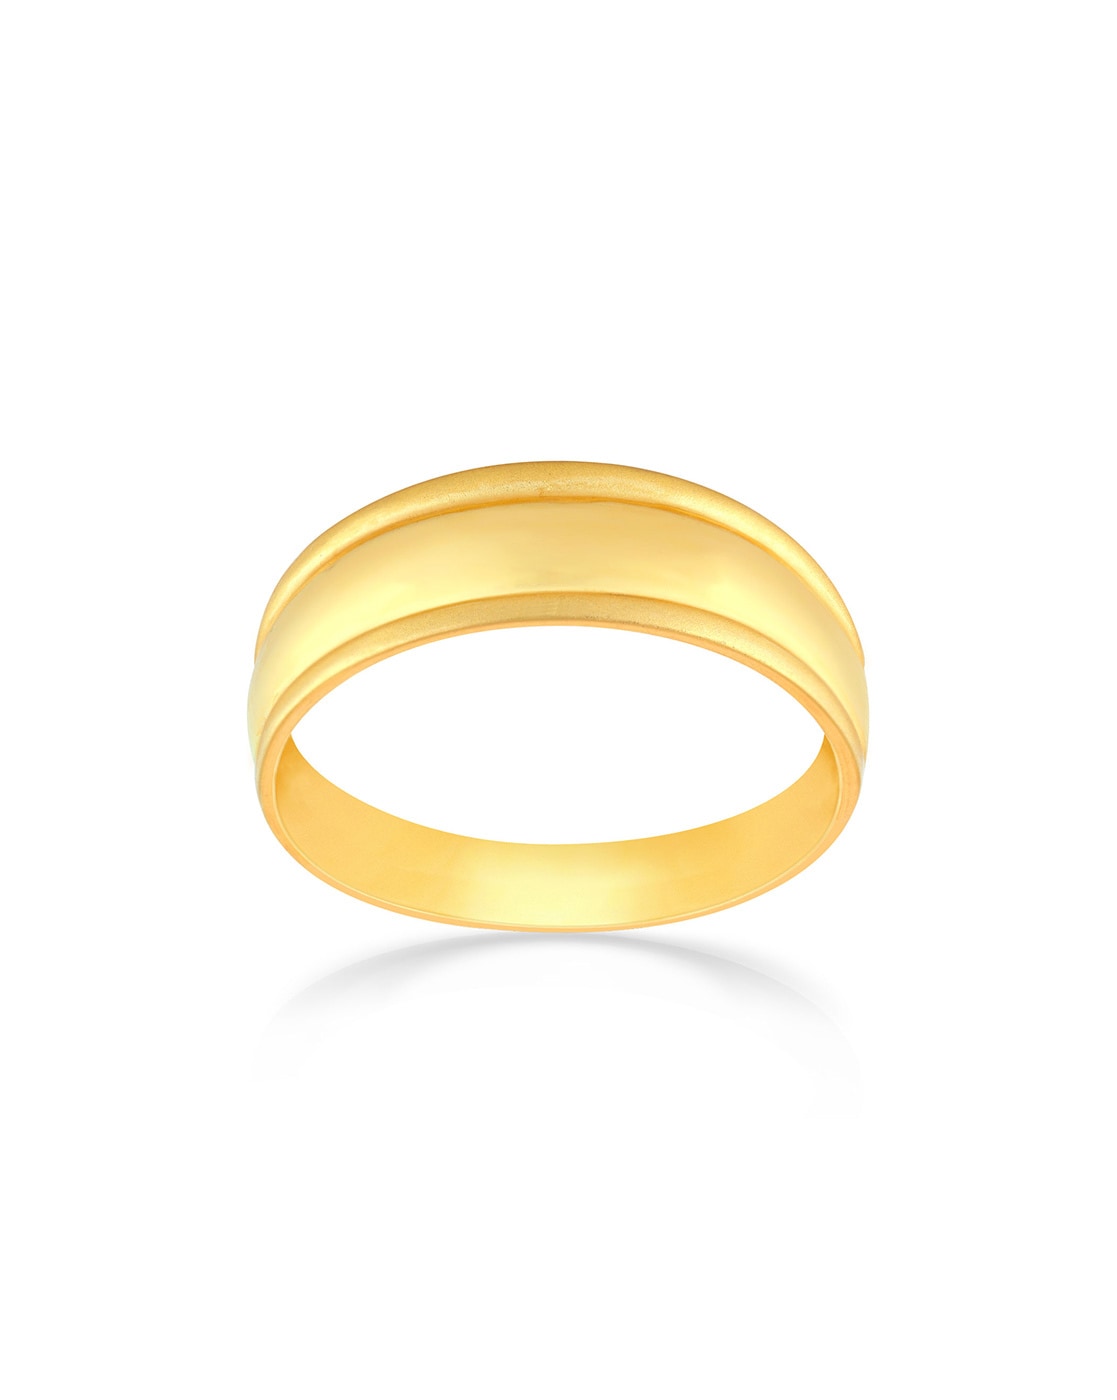 14K Gold 4.40MM Thick Half Round / Half Flat Band Rings for Women and Men -  Assorted Colors and Ring Sizes - Walmart.com